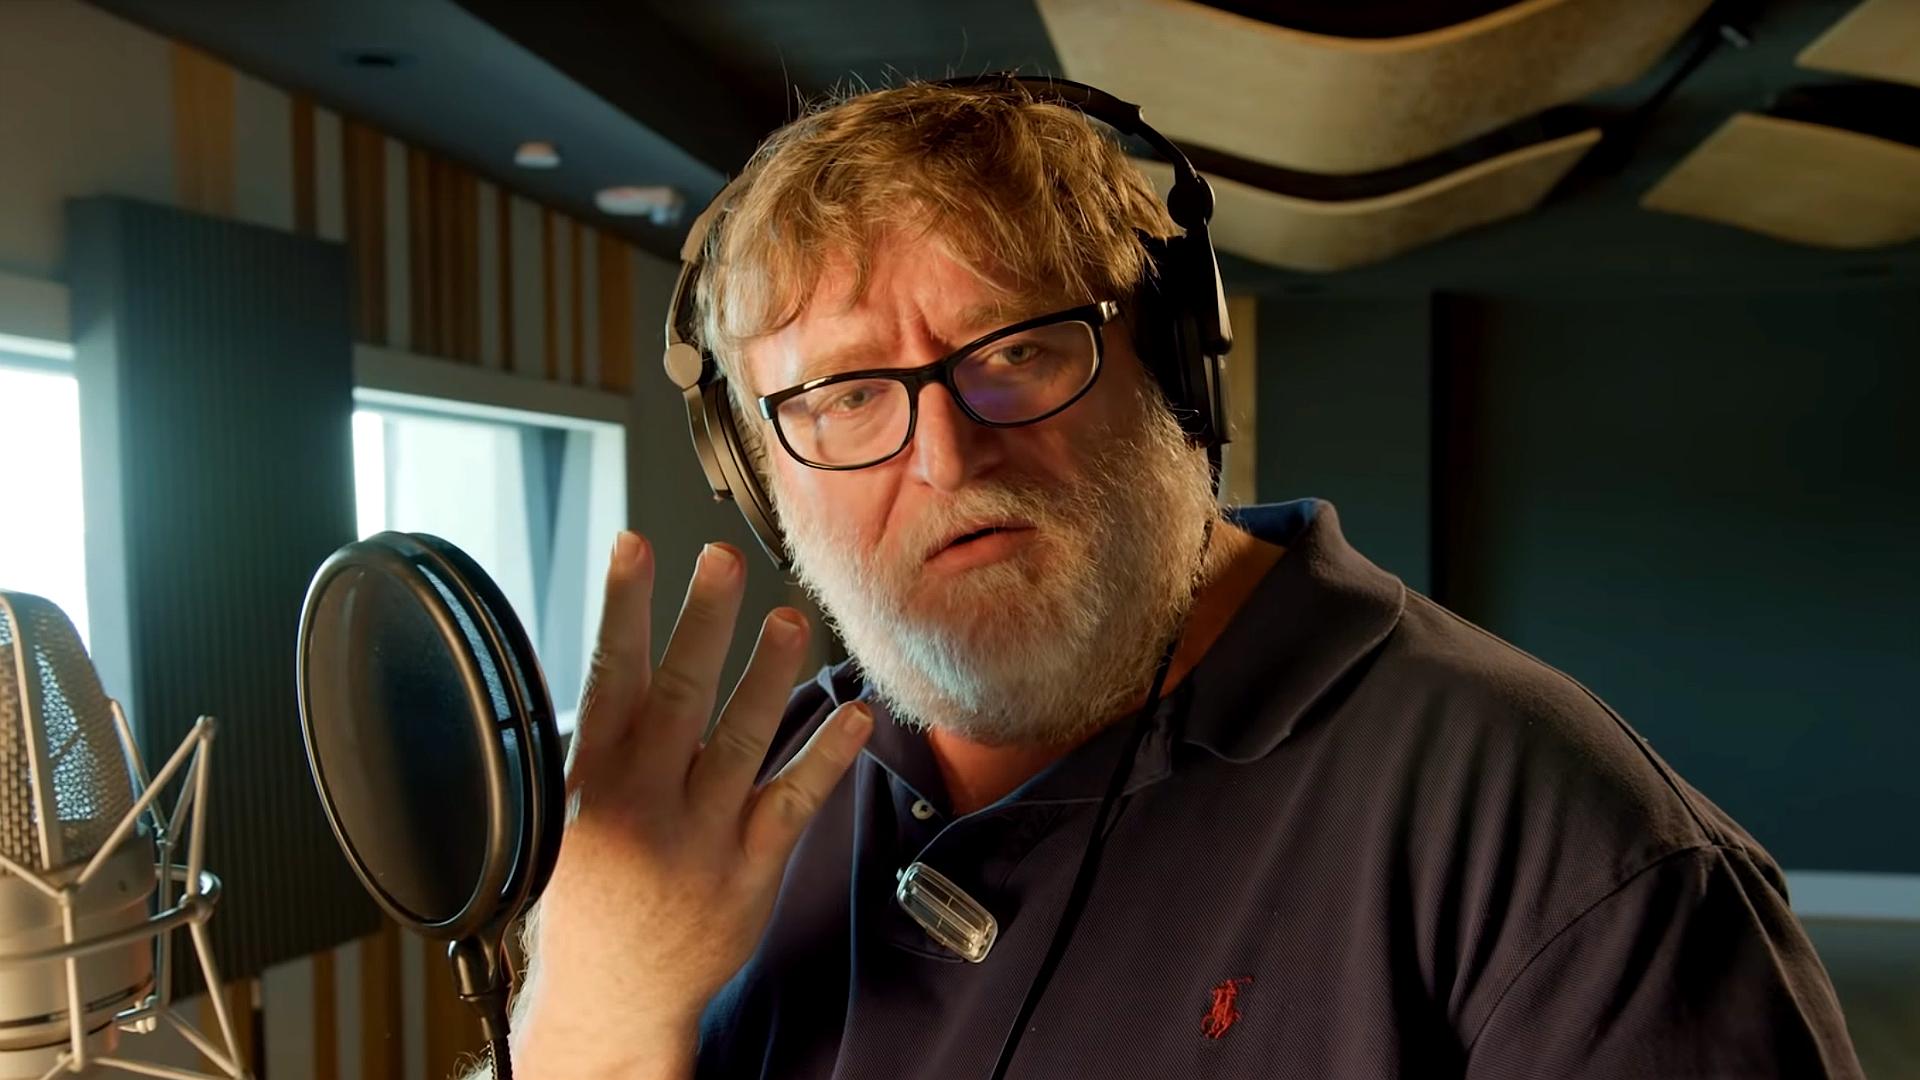 Valve's Gabe Newell Takes Video Gaming to the Next Level